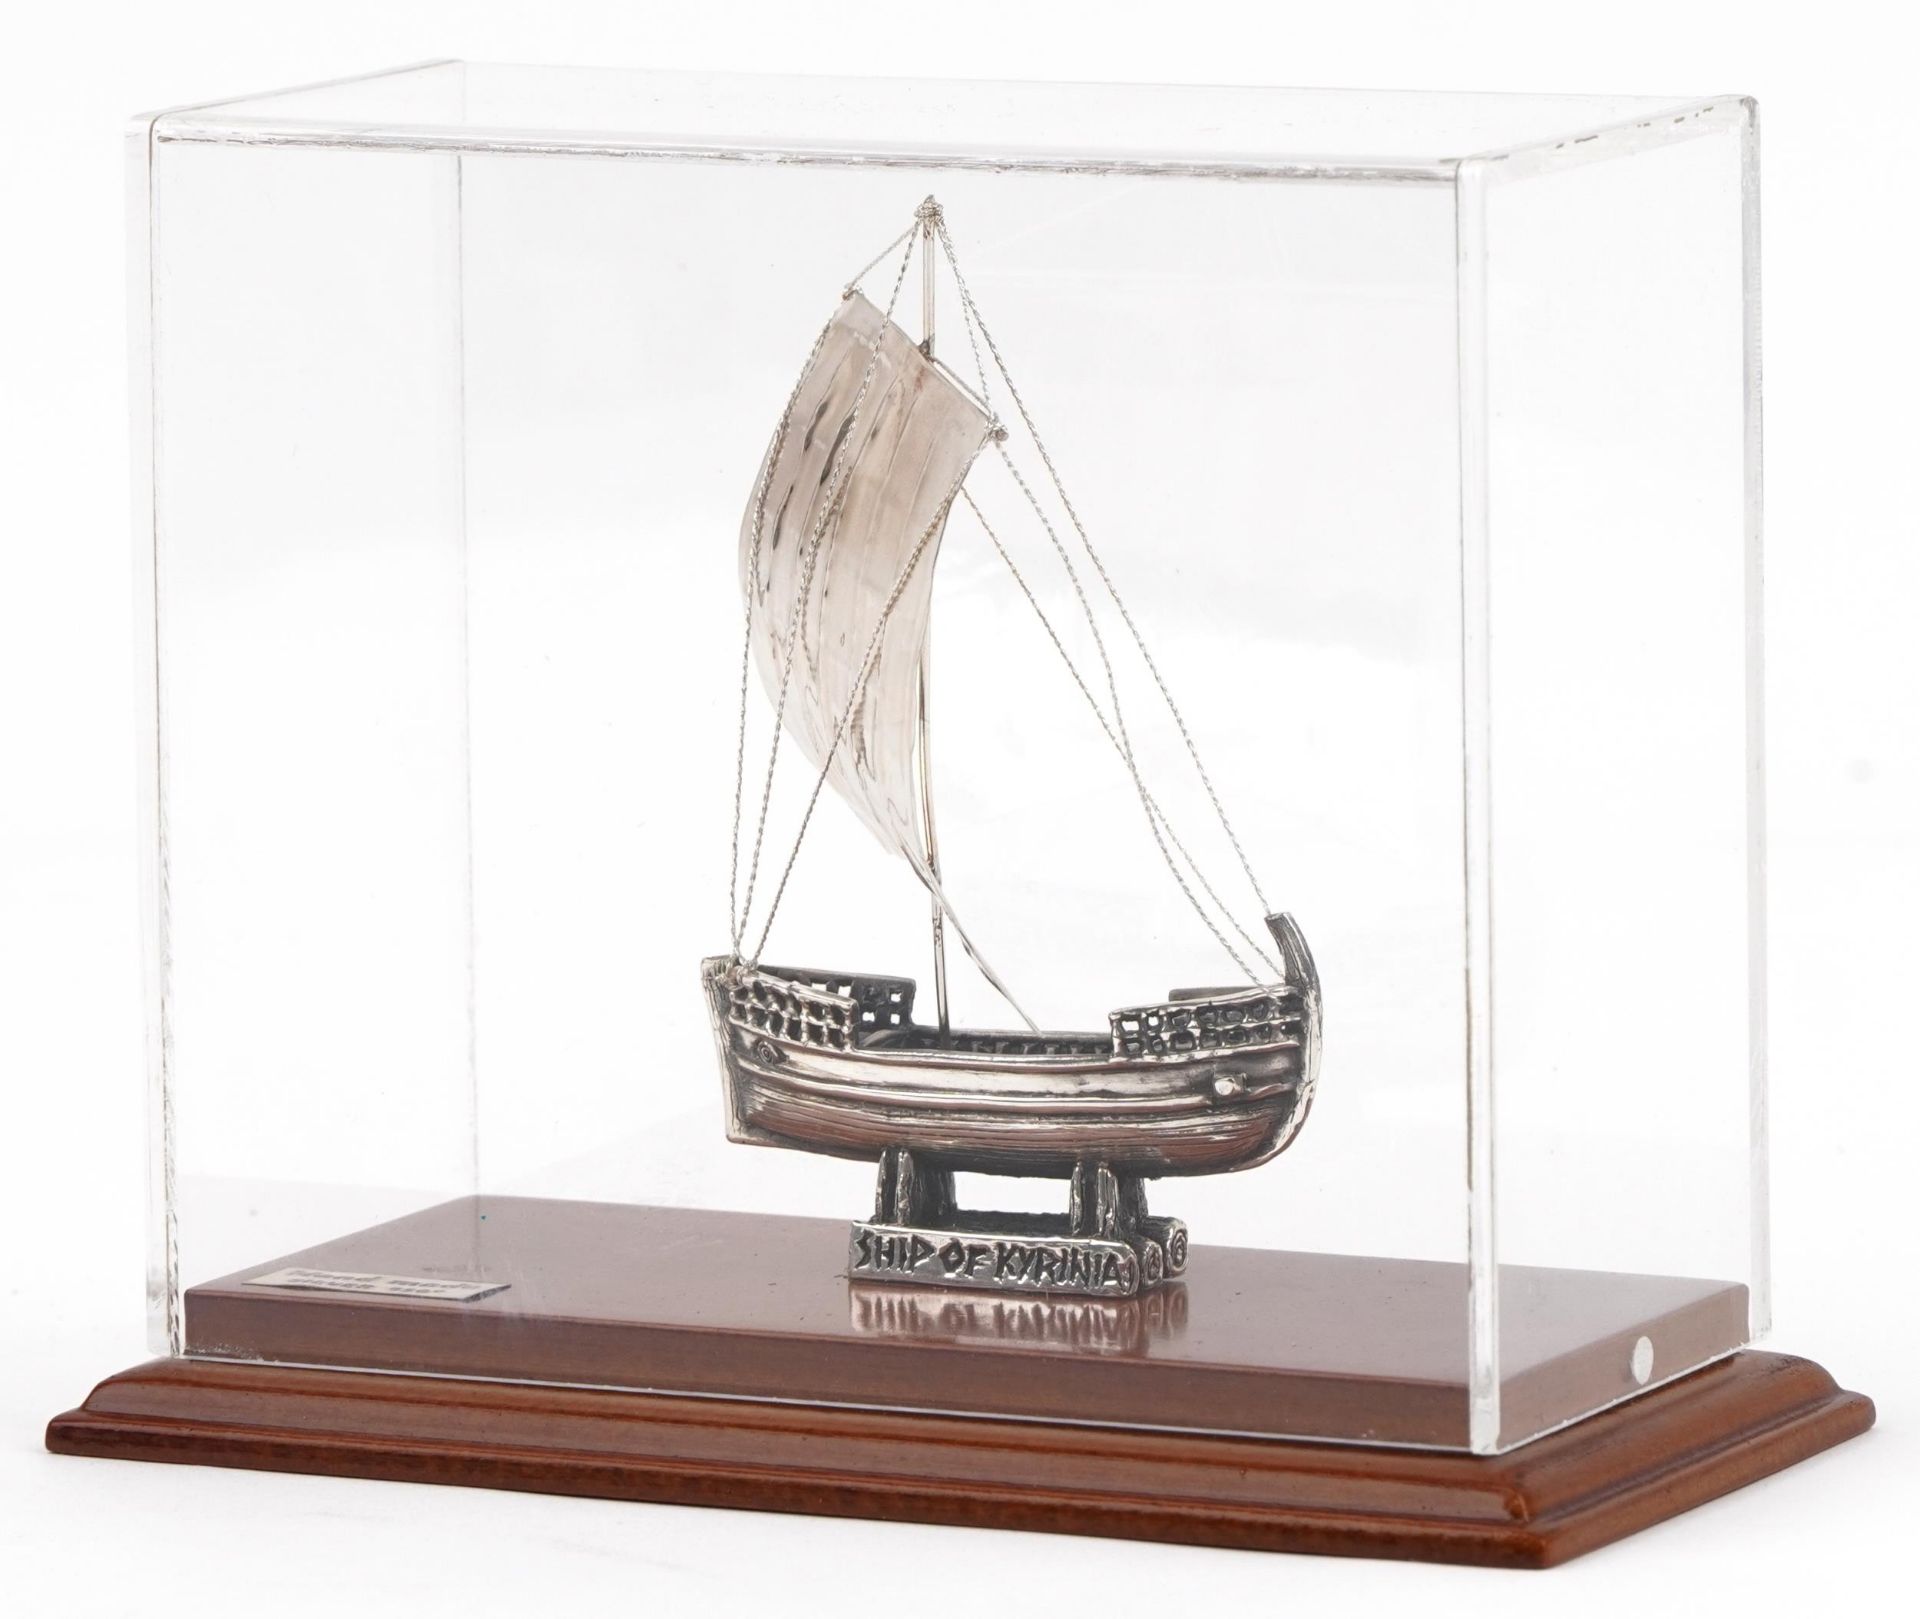 950 grade silver model of The Ship of Kyrenia housed in a display case, overall 14.5cm high,